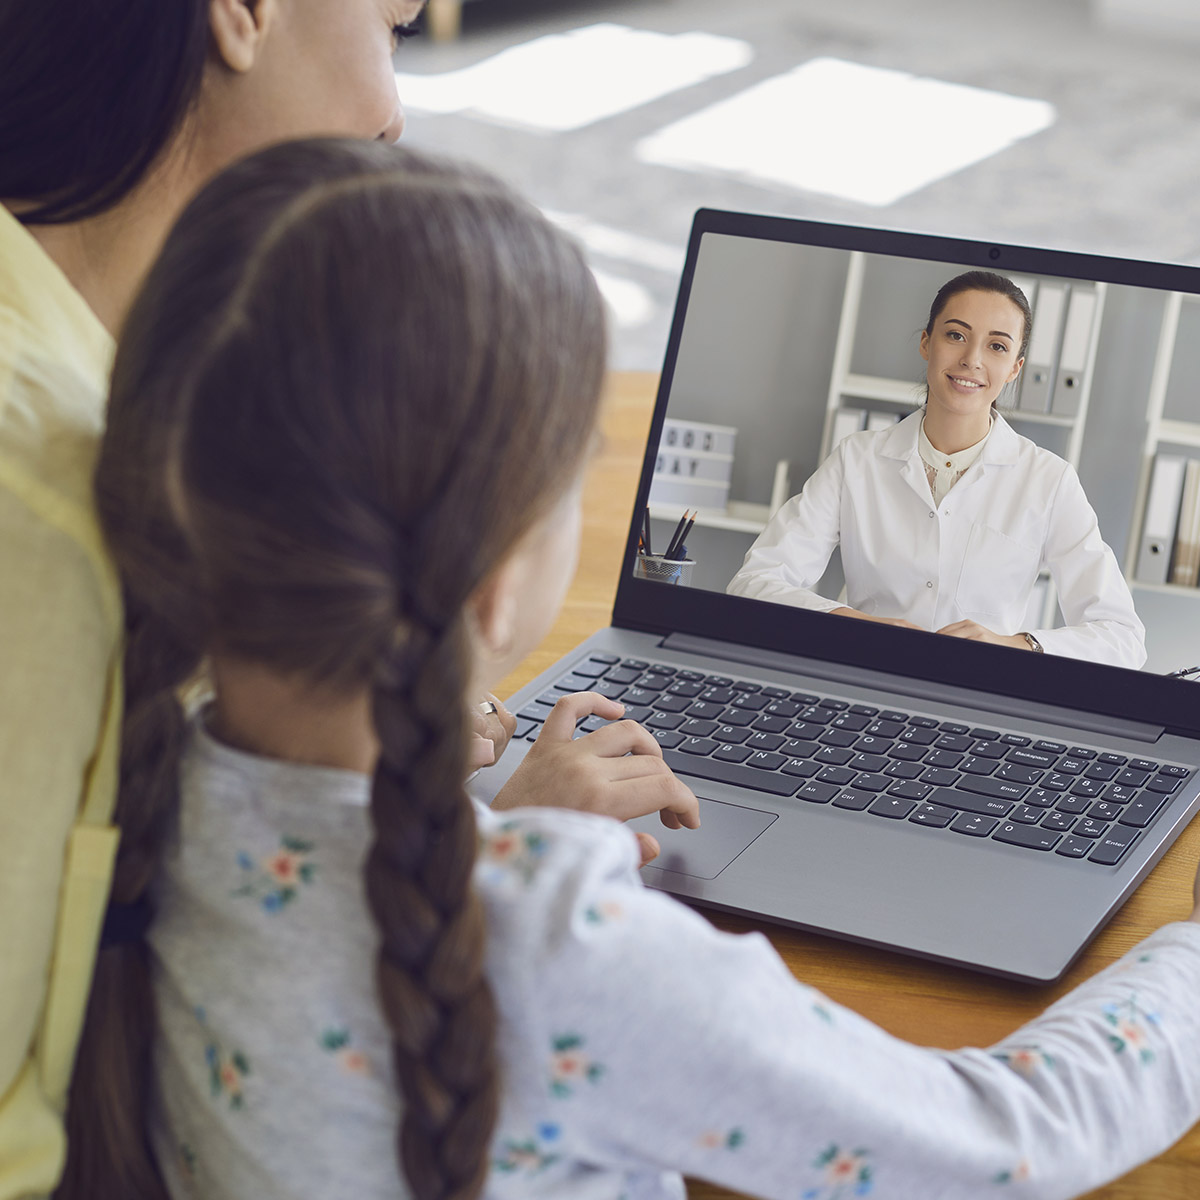 A woman and child video chat with another woman on a laptop.